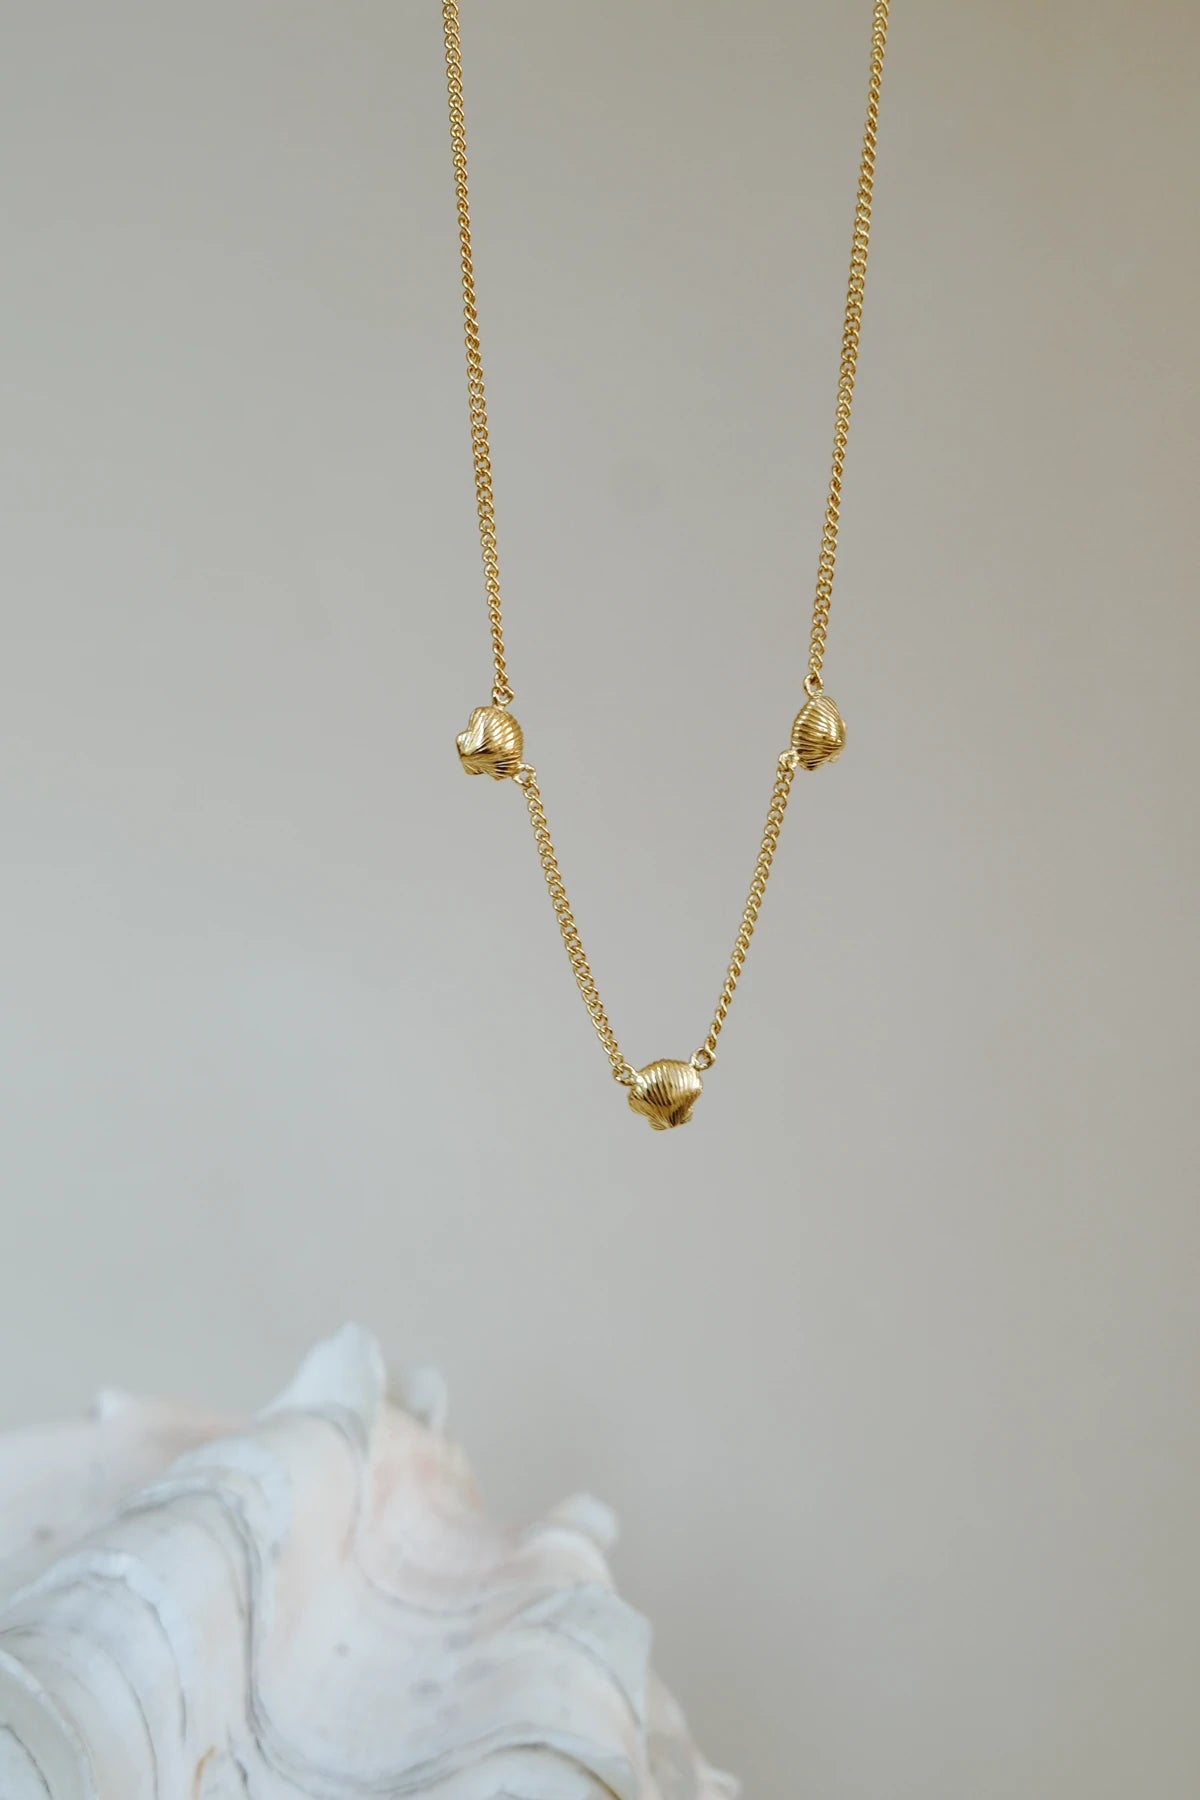 WILDTHINGS - Shell necklace gold plated